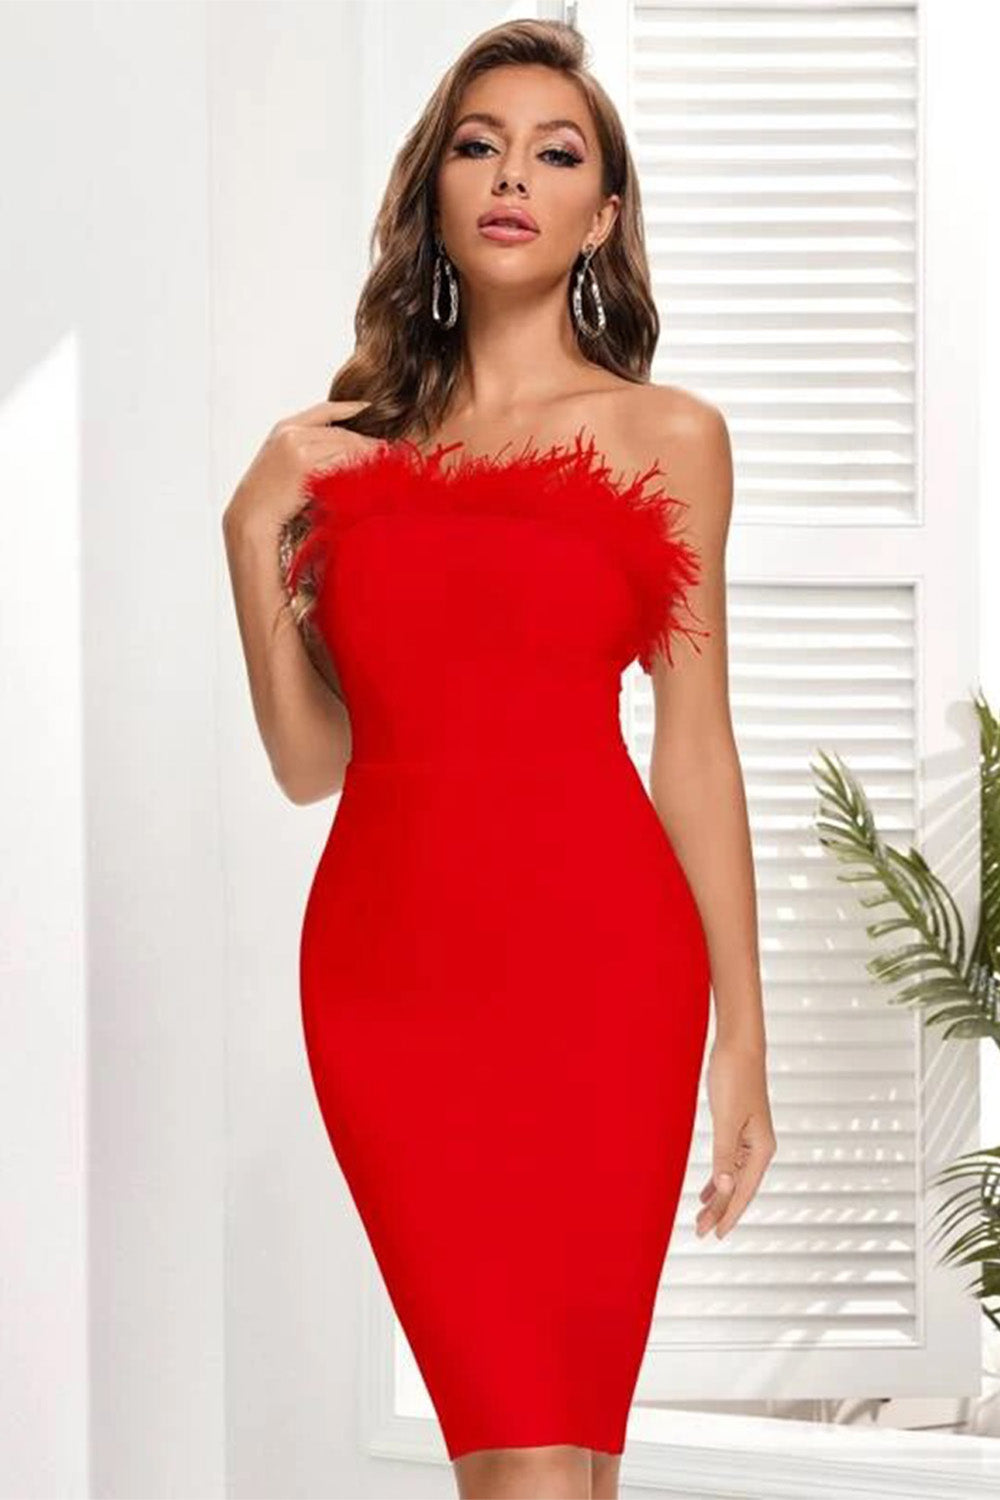 red bandage dress, red bodycon dress, feather bandage dress, cocktail dress, bandage dress for women, knee length bandage dress, sexy bandage dress, off shoulder bandage dress, bandage dress for women elegant, bright dress, colorful dress